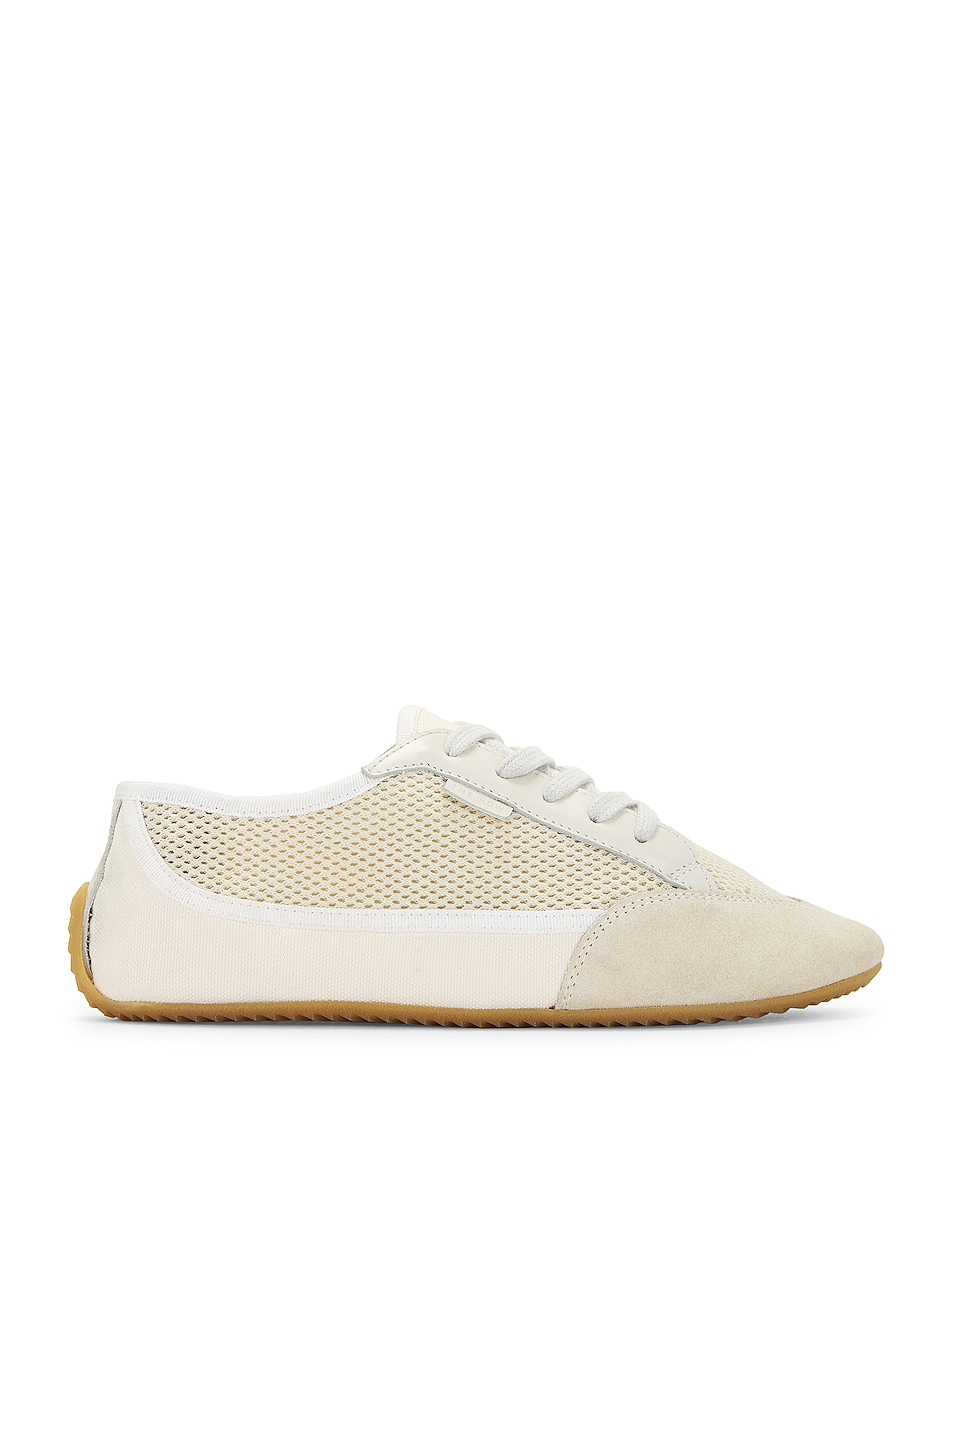 The Row Bonnie Sneaker in Ivory & Ivory | FWRD